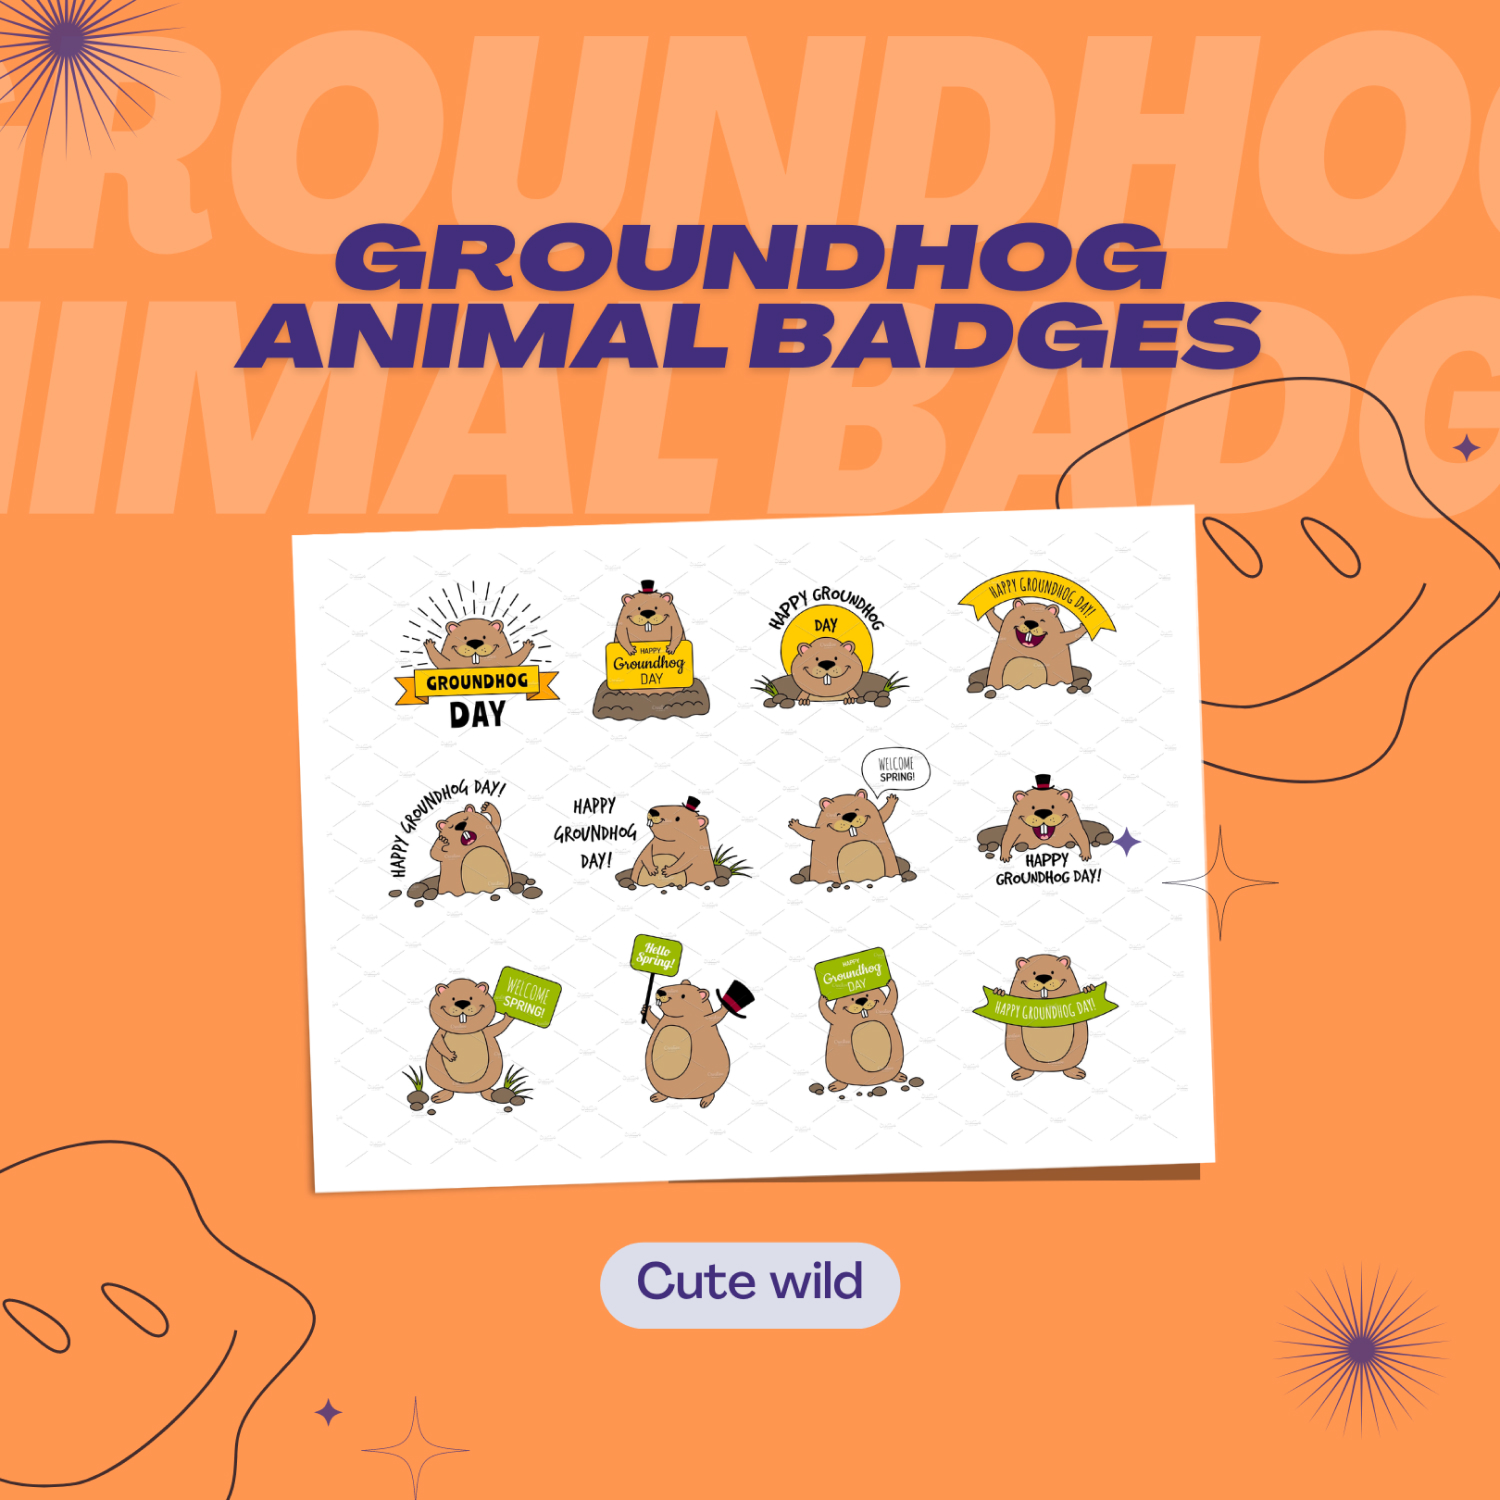 Preview images with groundhog animal badges.